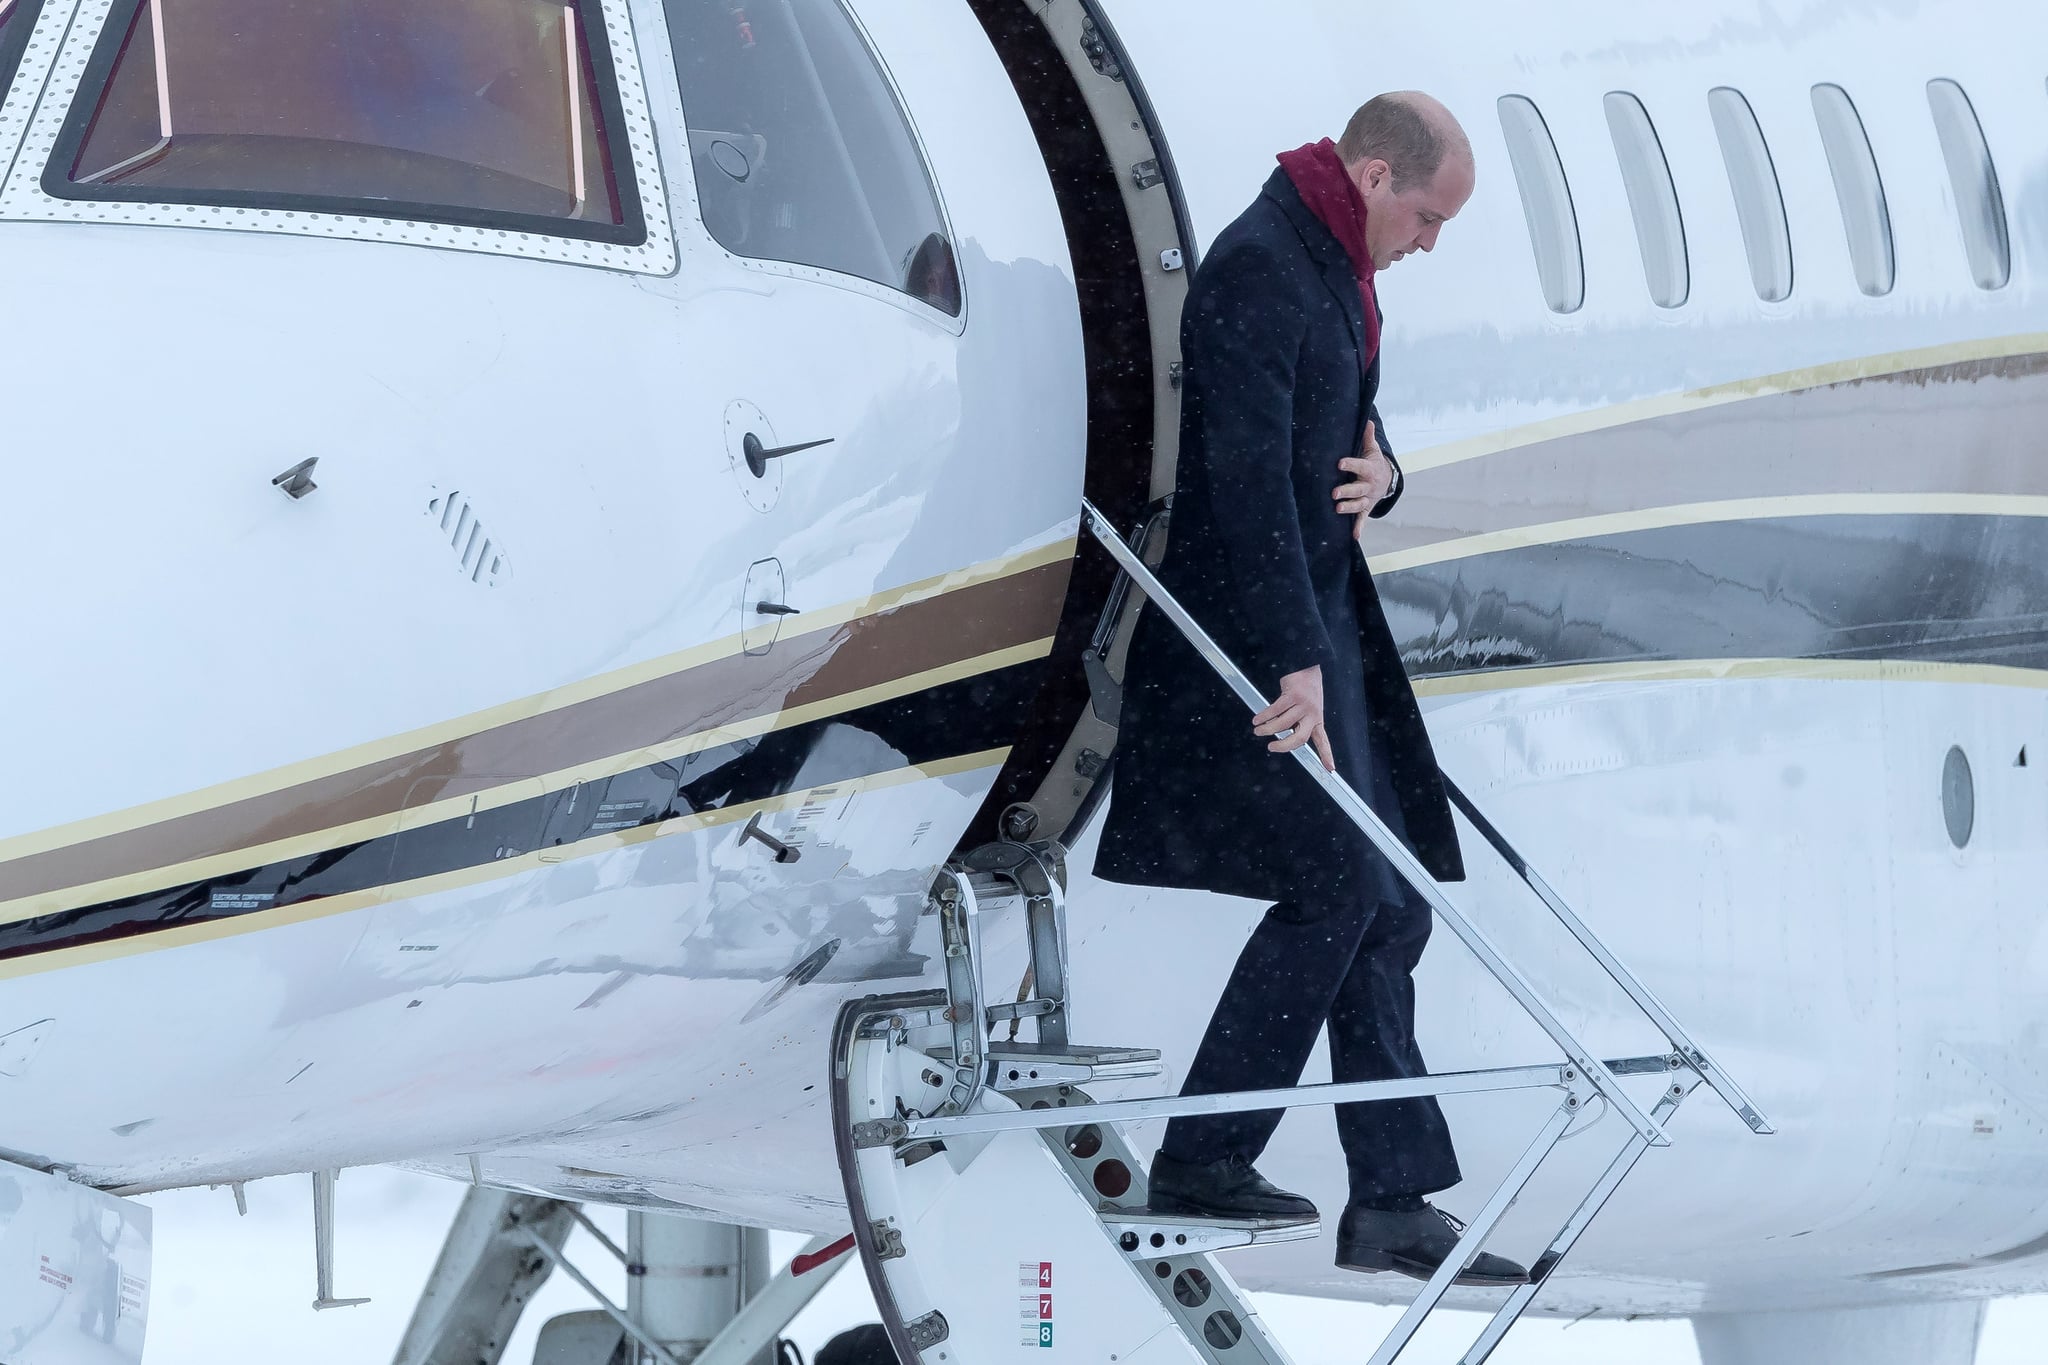 OSLO, NORWAY - FEBRUARY 01: Prince William, Duke of Cambridge walks down the steps of an aeroplane during as he arrives at the Gardermoen Air Force Base on day 3 of the royal visit to Sweden and Norway on February 1, 2018 in Oslo, Norway. (Photo by Nigel Waldron/Getty Images)